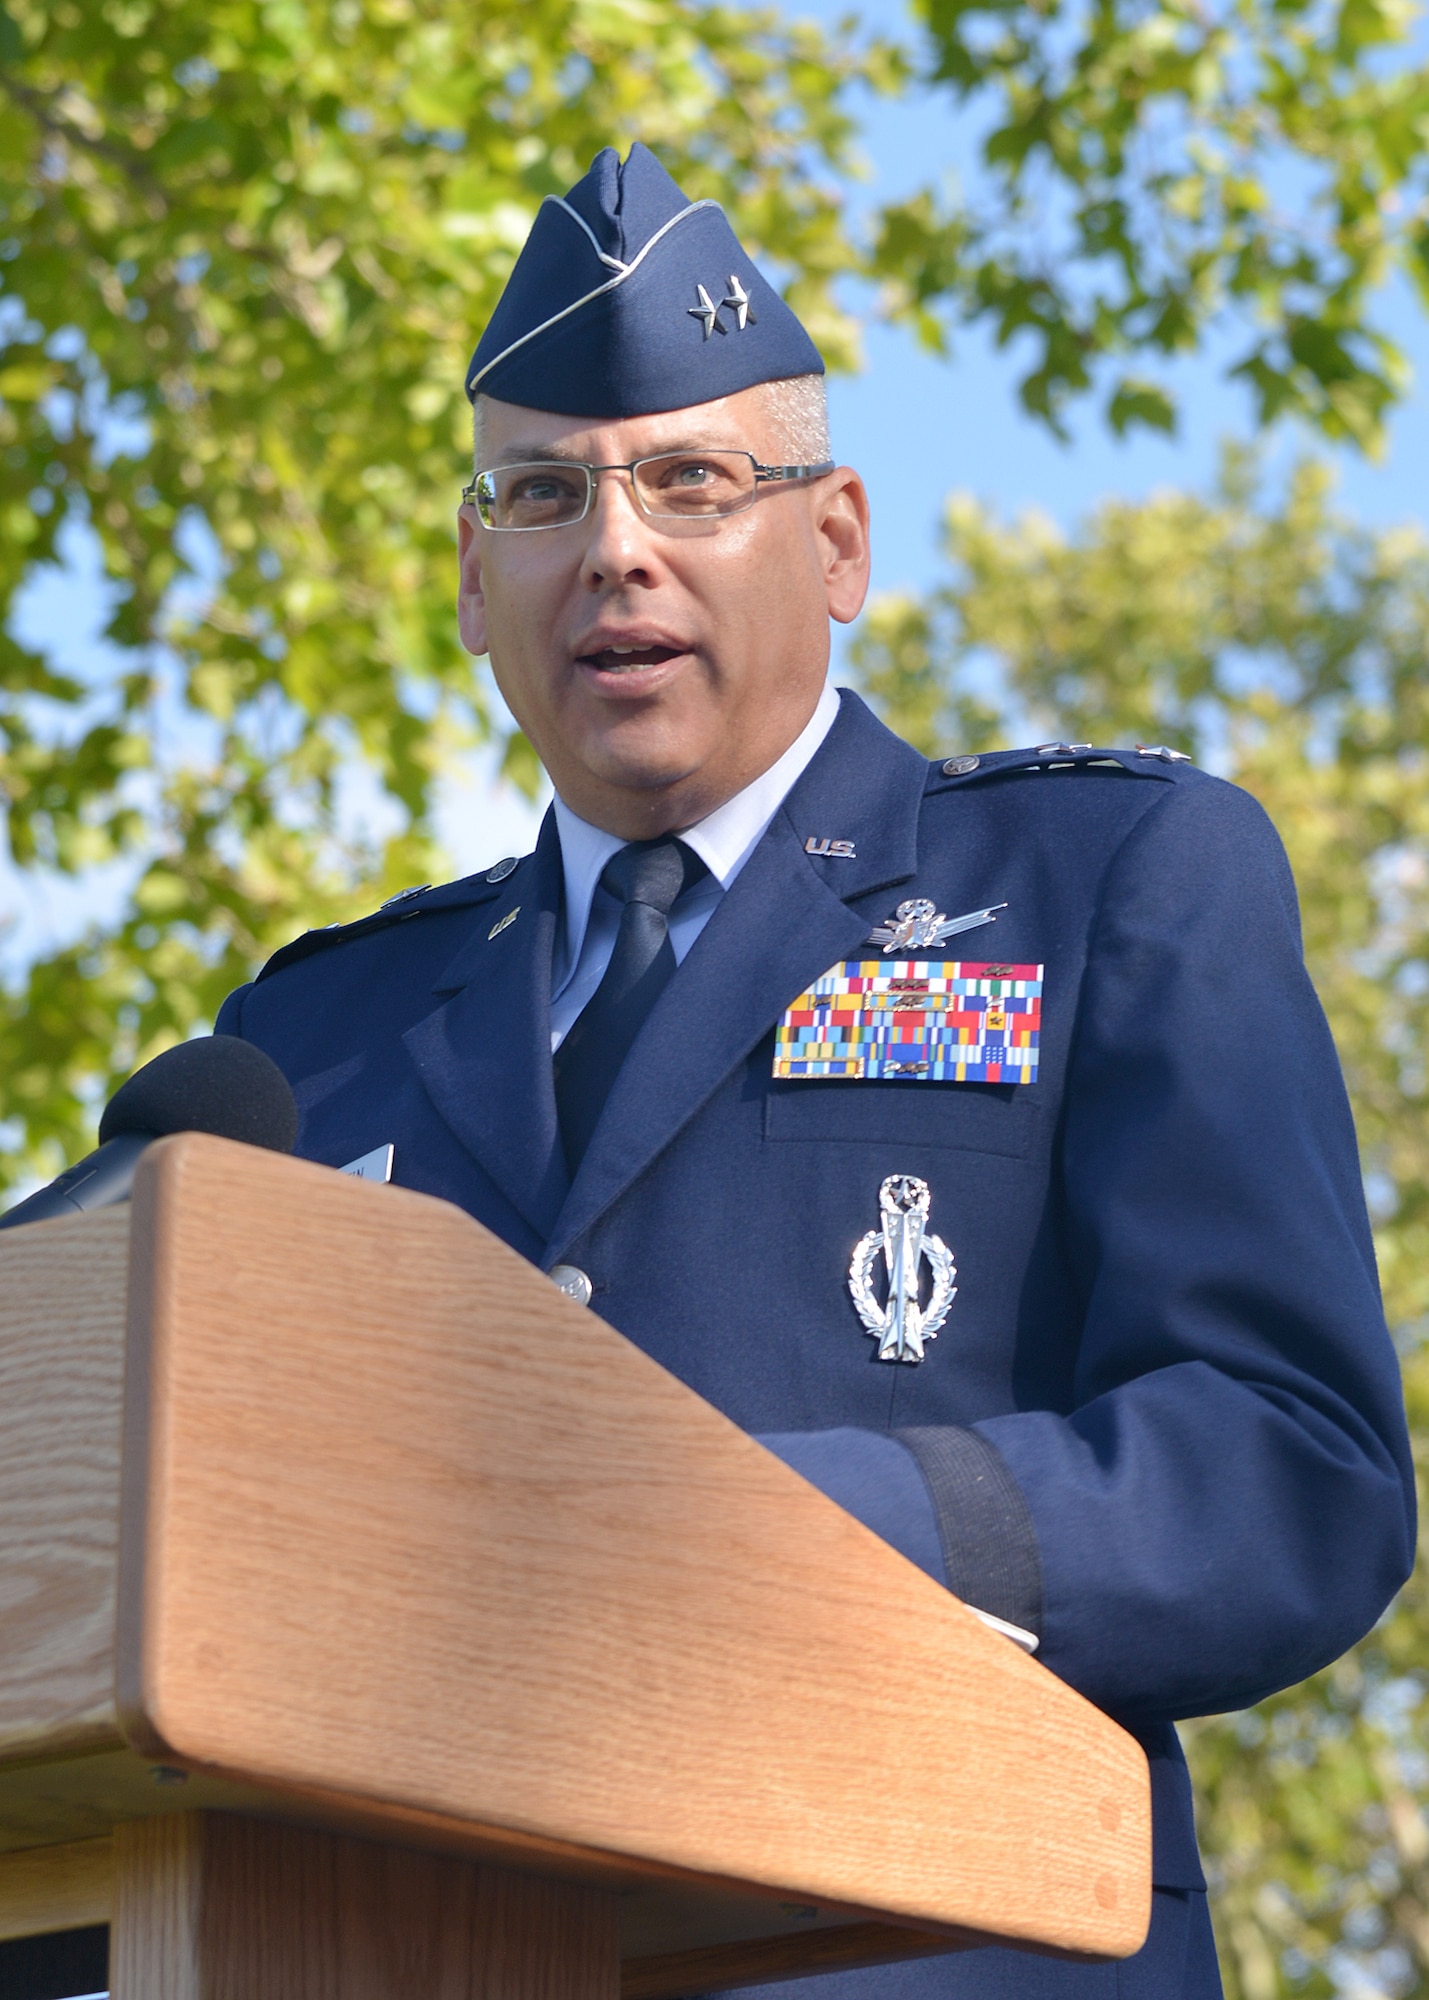 Maj. Gen. Jack Weinstein, 20th Air Force commander, speaks at a ceremony Oct. 1, 2015, at Kirtland Air Force Base, N.M., transitioning the 377th Air Base Wing from Air Force Materiel Command to Air Force Global Strike Command. (U.S. Air Force by Todd Berenger/Released)